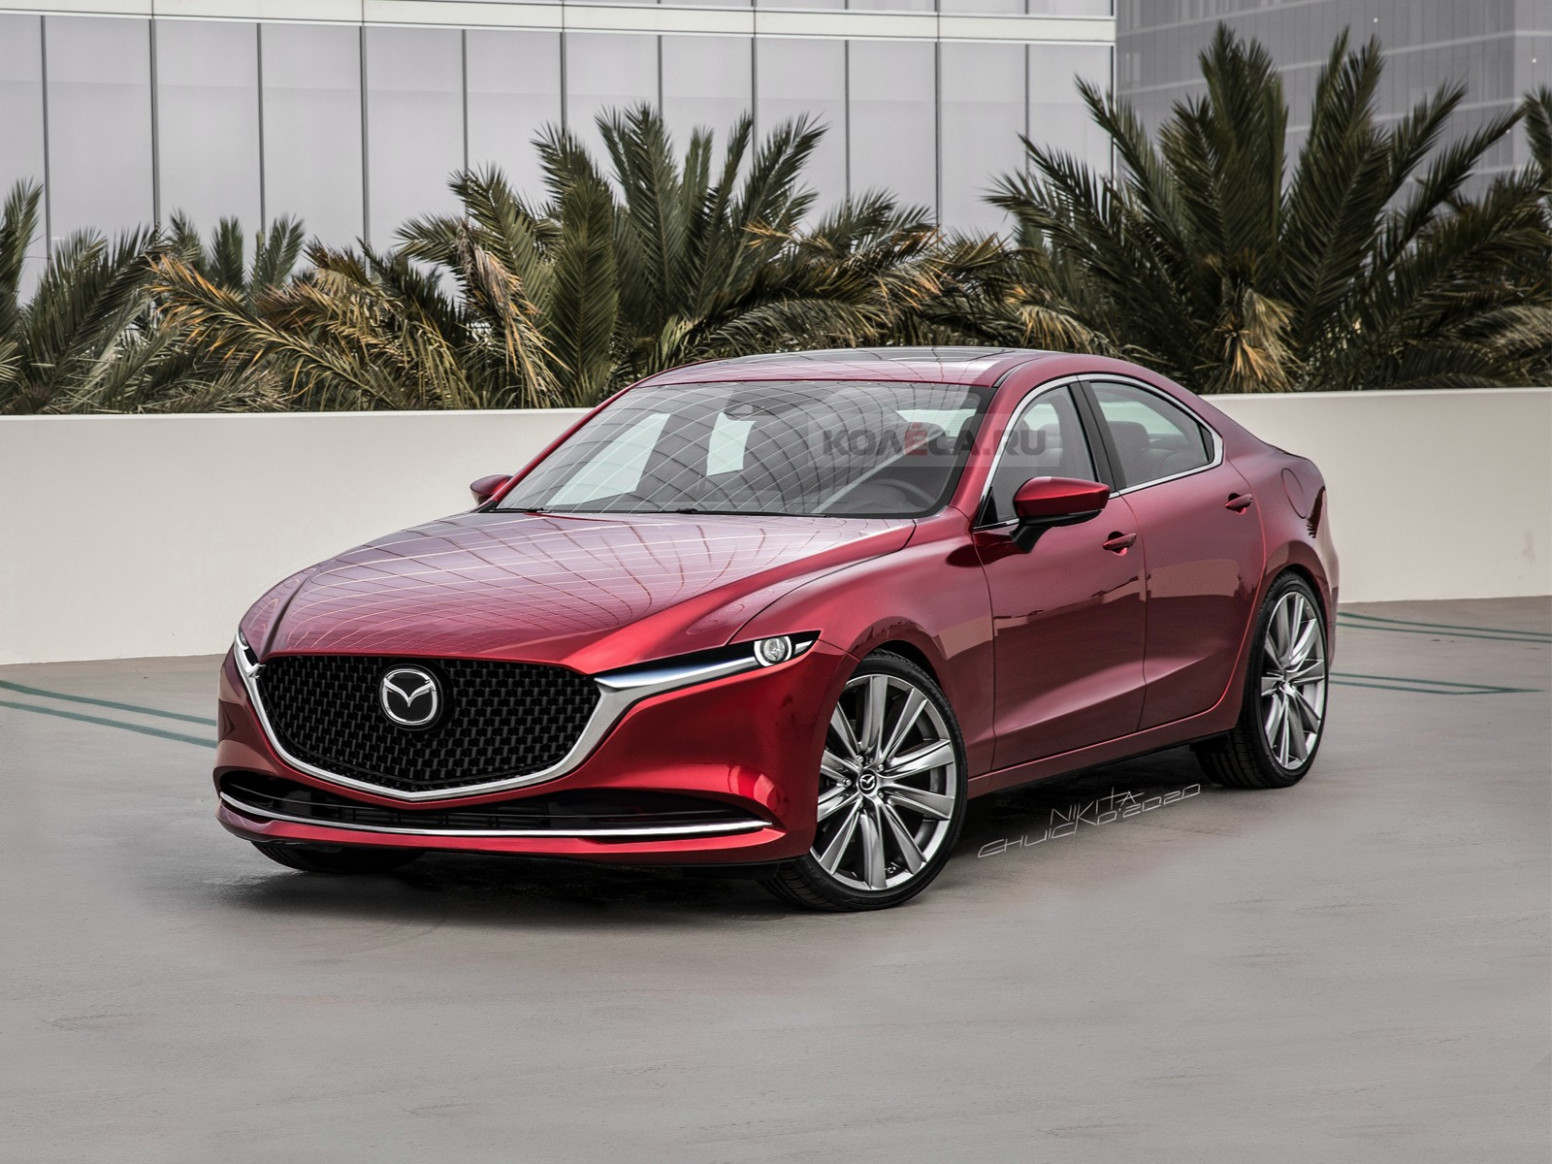 Redesign and Concept 2022 Mazda 6